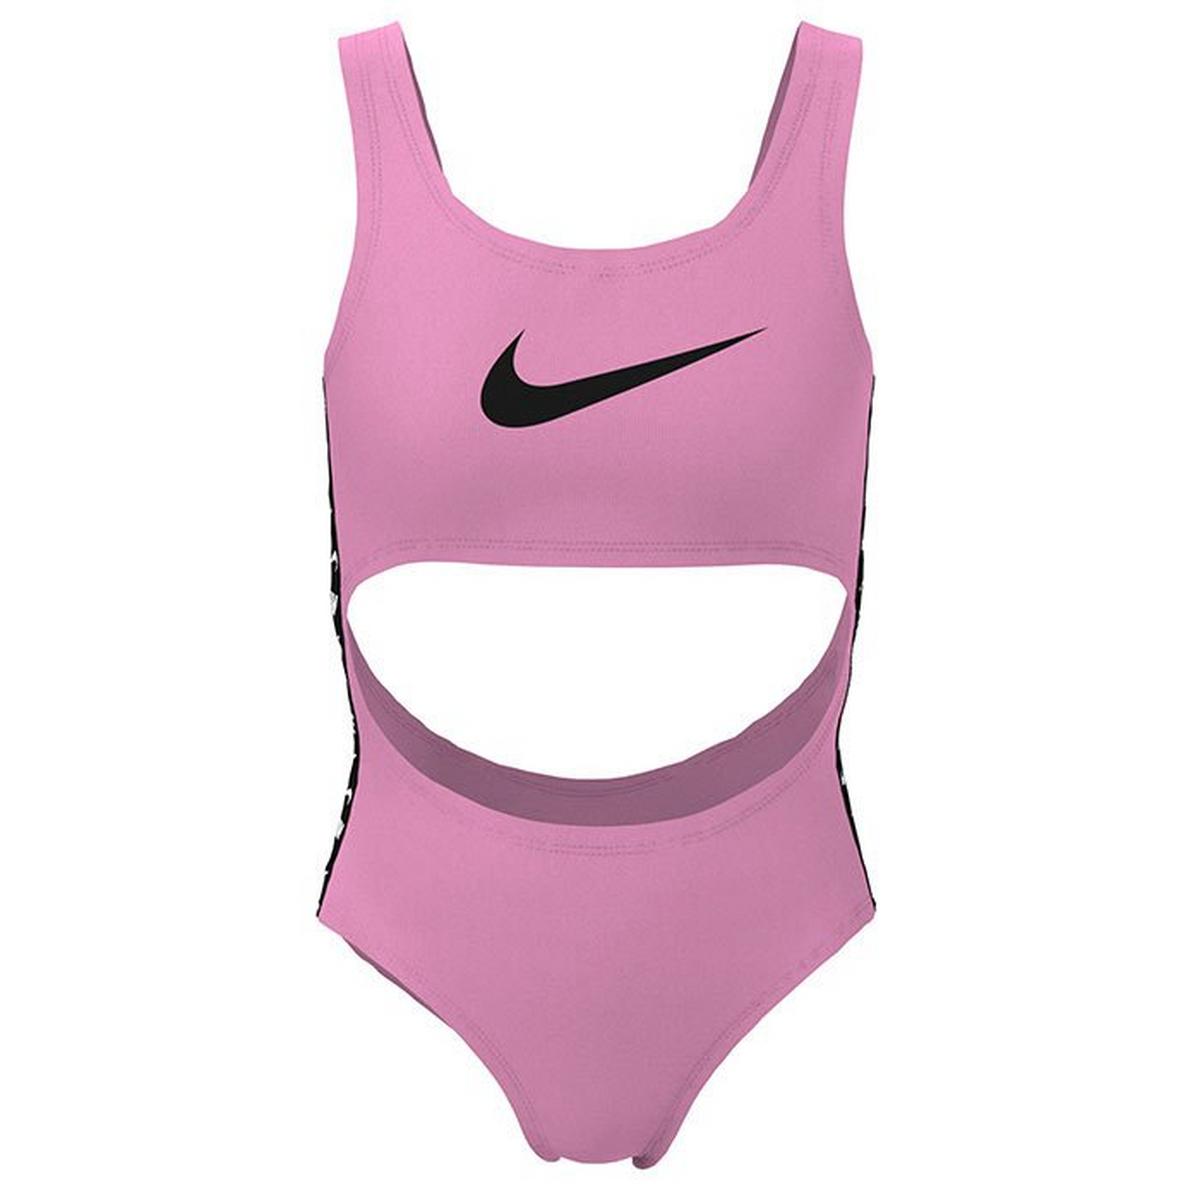 Junior Girls' [7-16] Logo Tape Cut-Out One-Piece Swimsuit